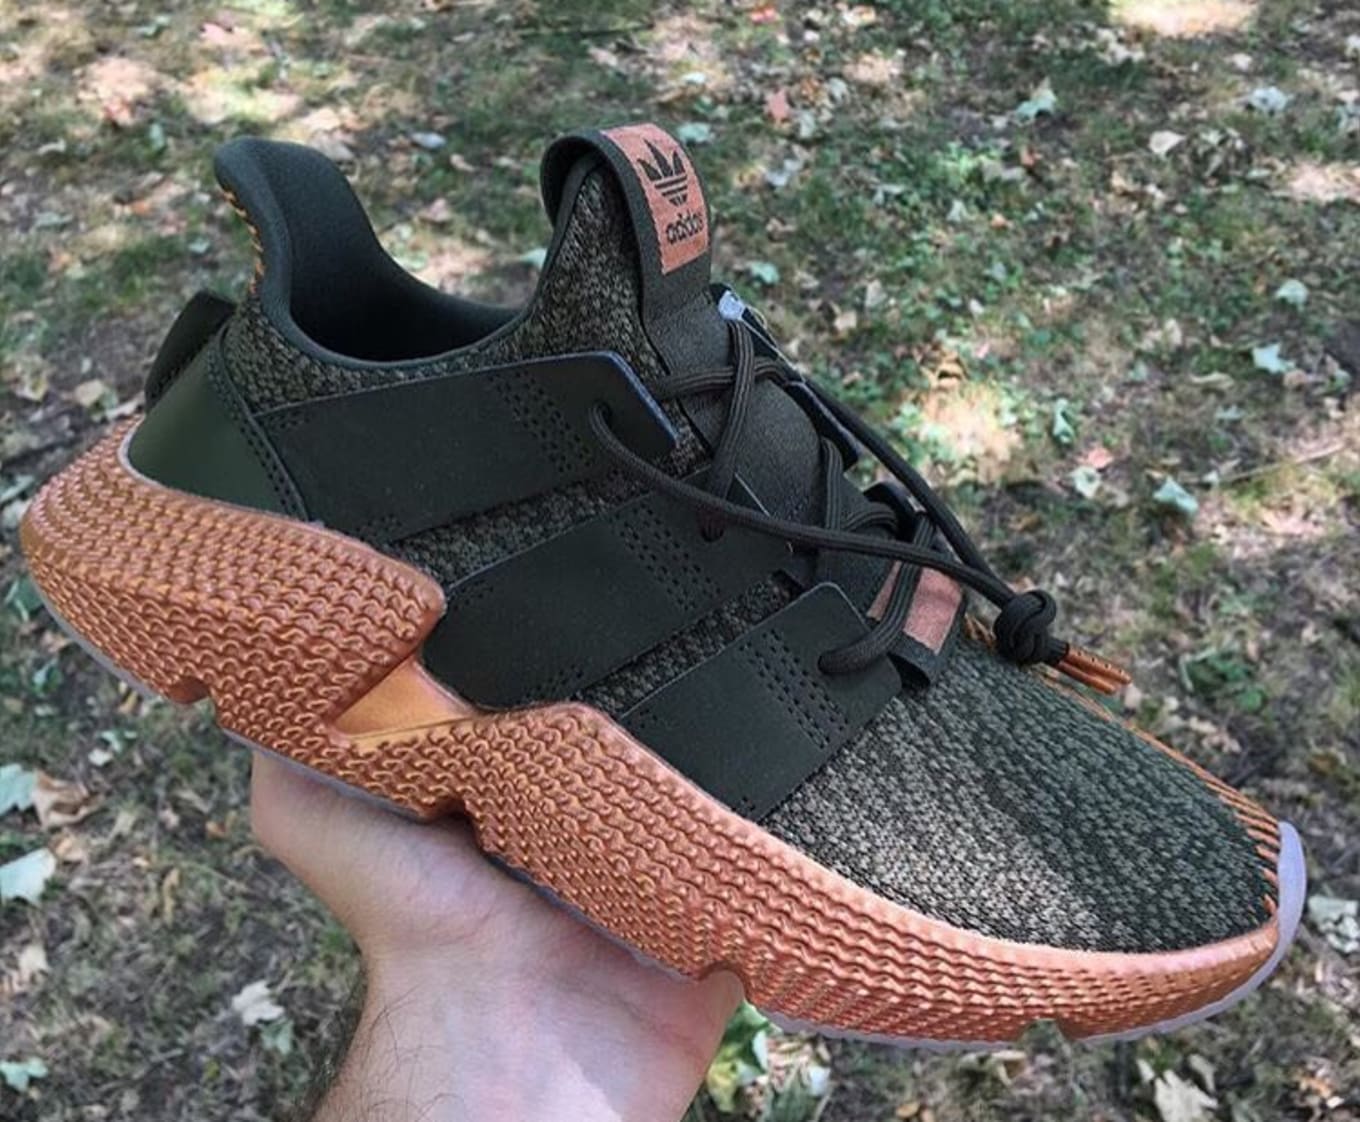 Leaked Images Of the Adidas PROPHERE 